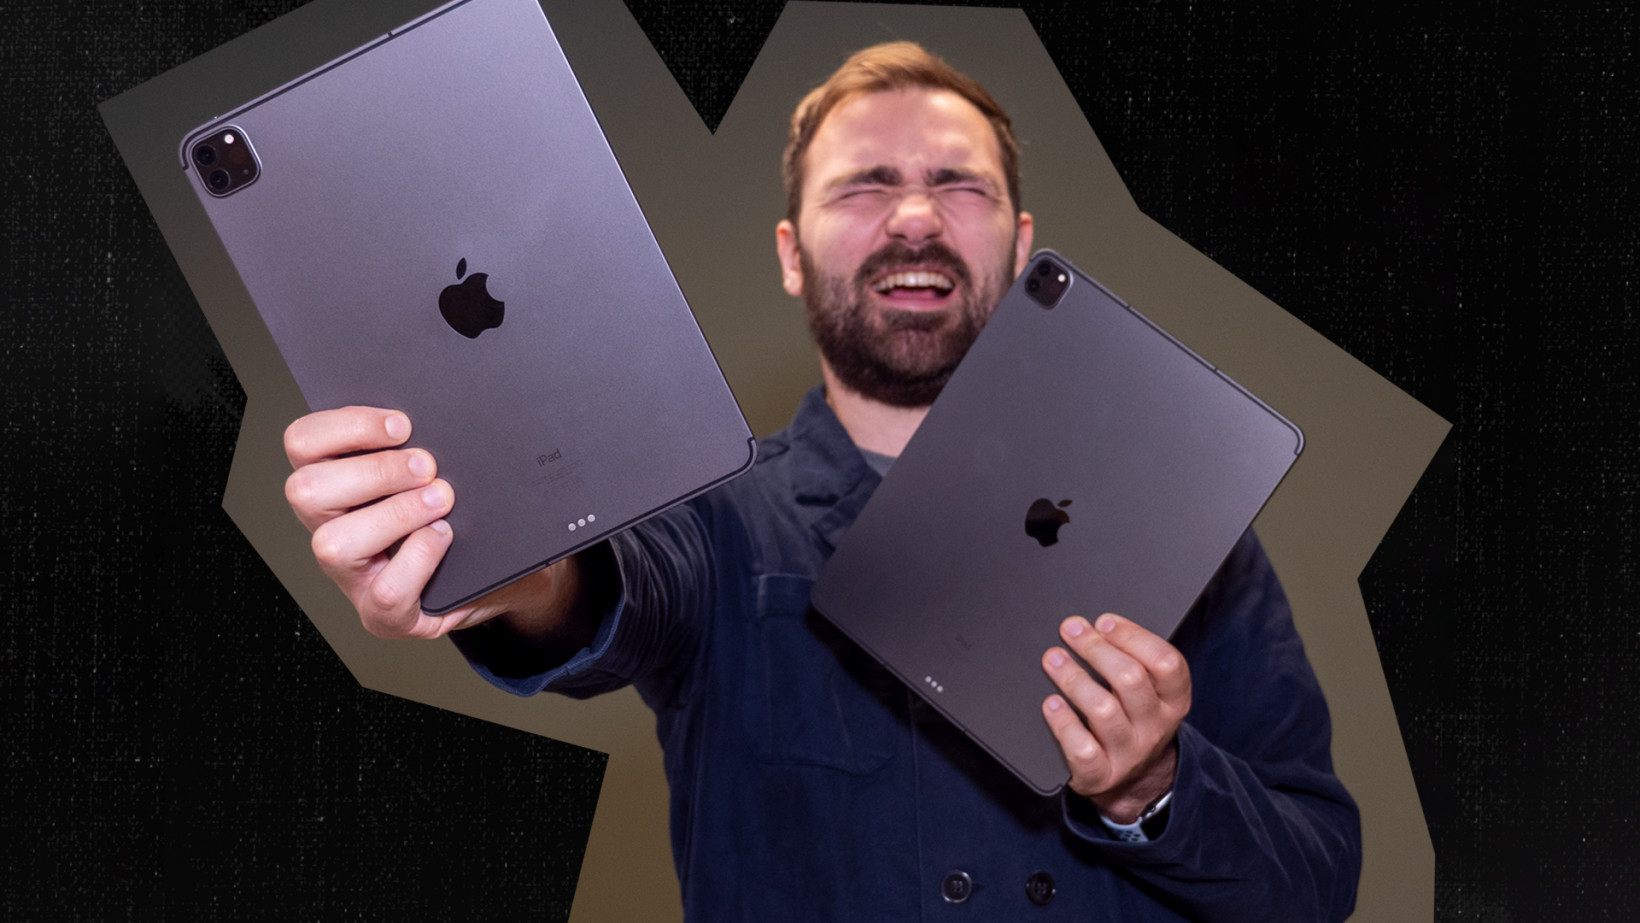 iPad Pro 11 vs. 12.9: Which One Is Right for You? (Definitive Guide) 